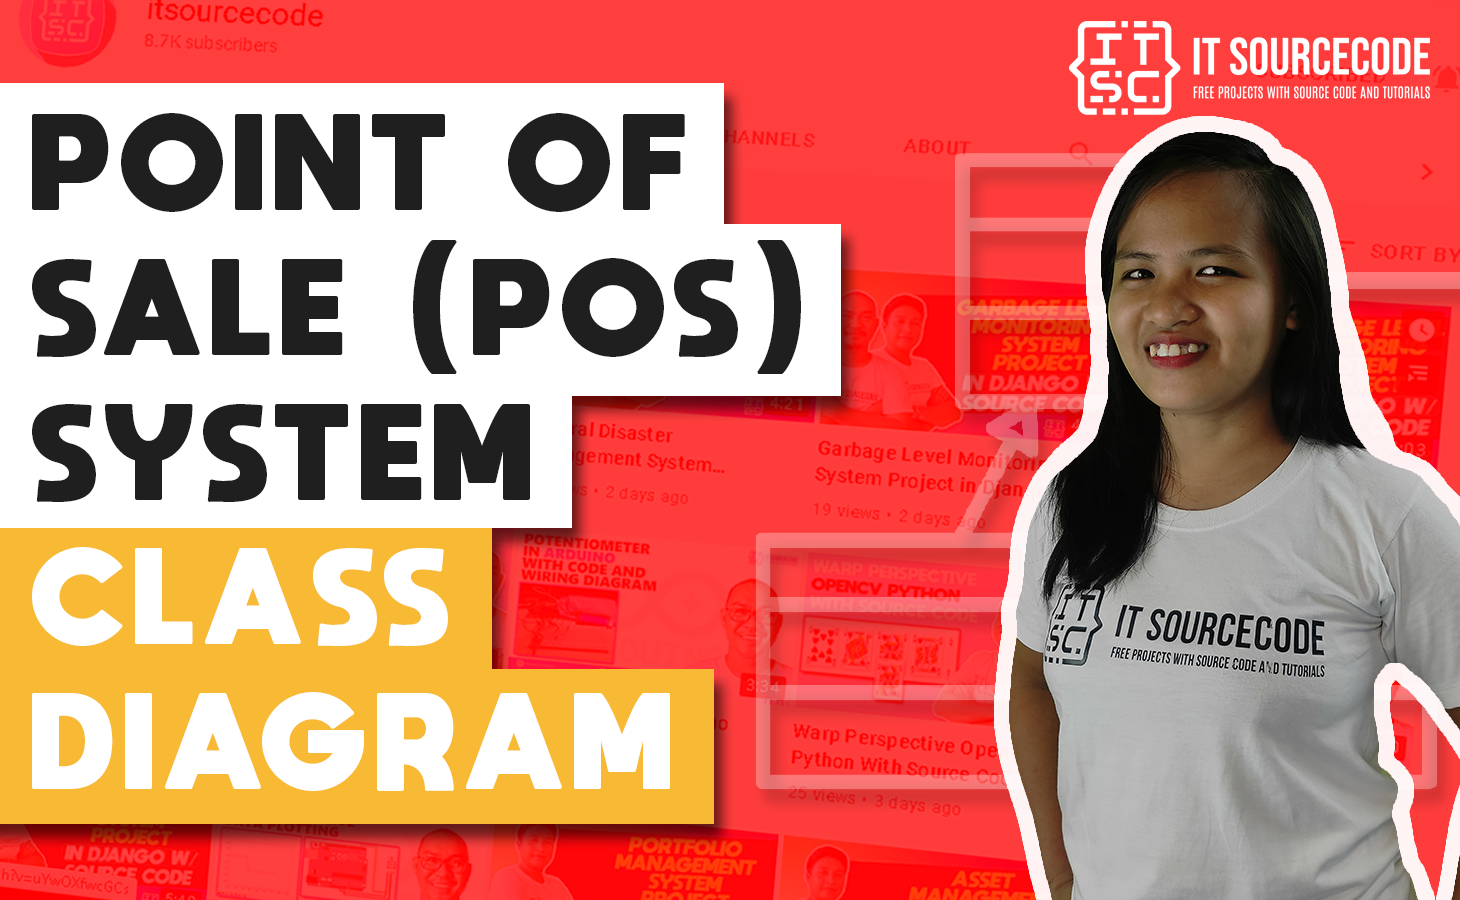 Class Diagram of Point of Sale (POS) System